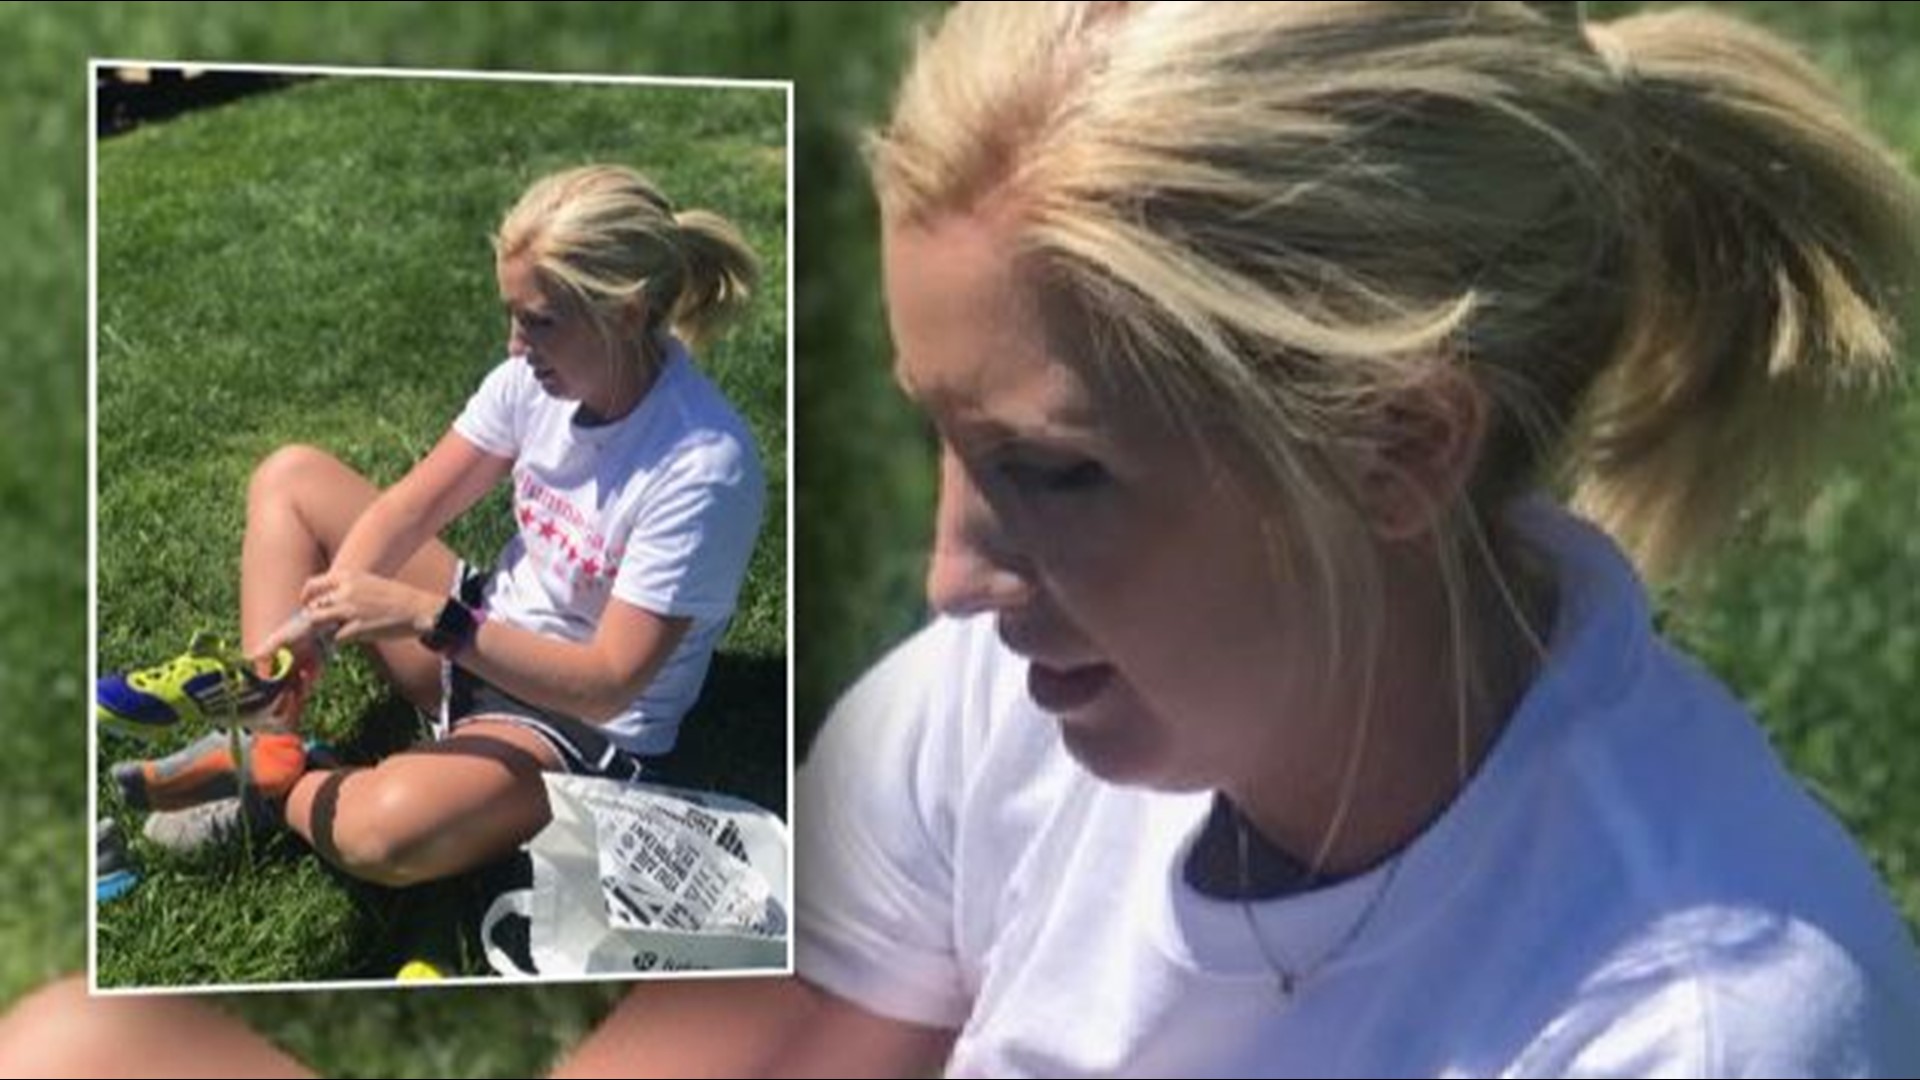 Lauren Murphy's had a long road to recovery with multiple brain surgeries, therapy sessions and countless hours of rehab and training after she was hit by a car while running six years ago.